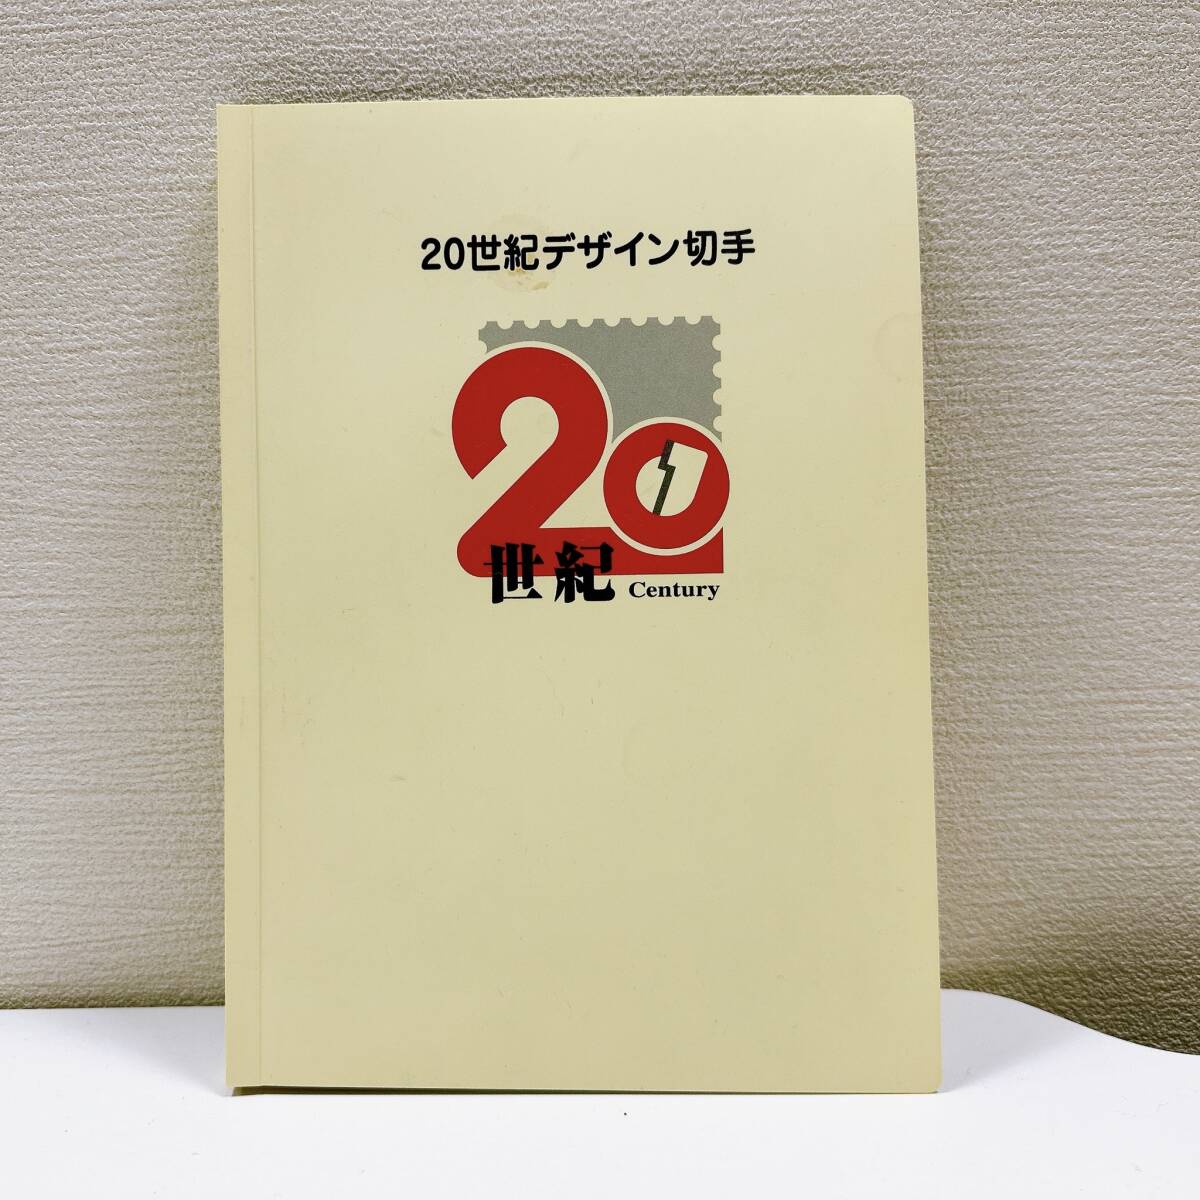 [ART-5572] 1 jpy ~ 20 century design stamp 1 compilation ~17 compilation Complete face value 12580 jpy extra attaching stamp mail collection album completion goods present condition storage goods 